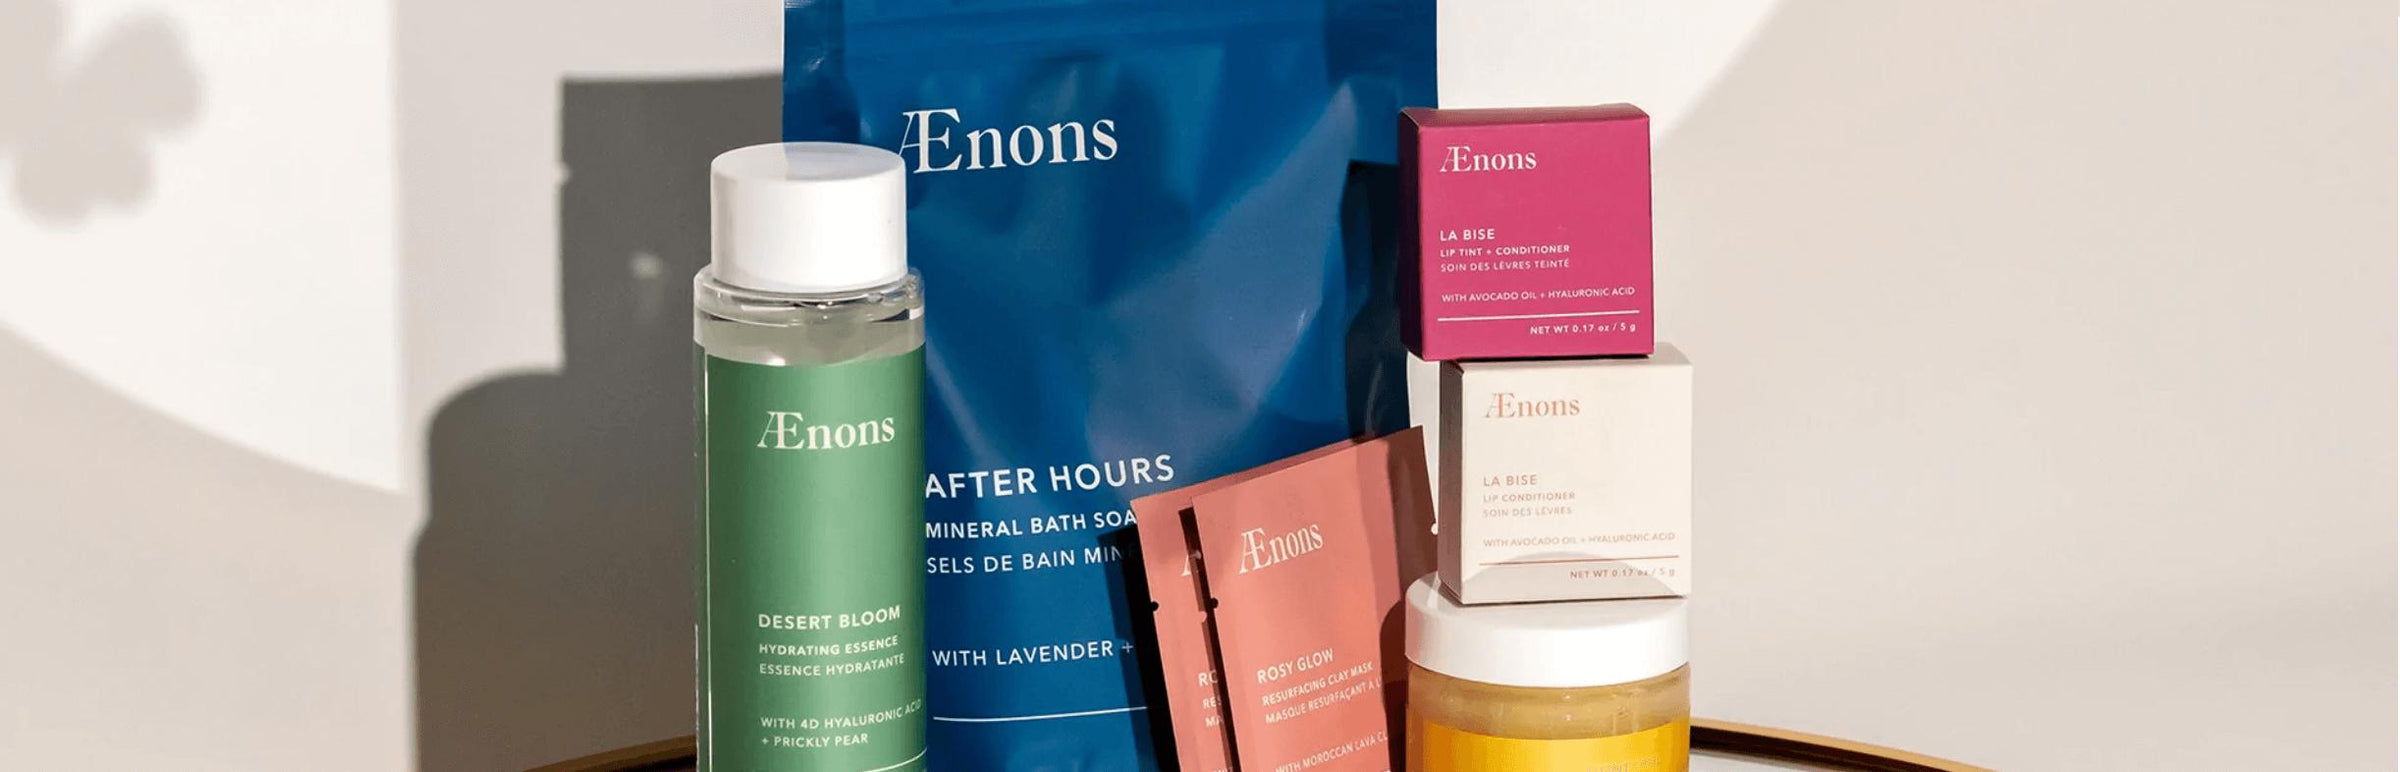 Aenons skincare collection